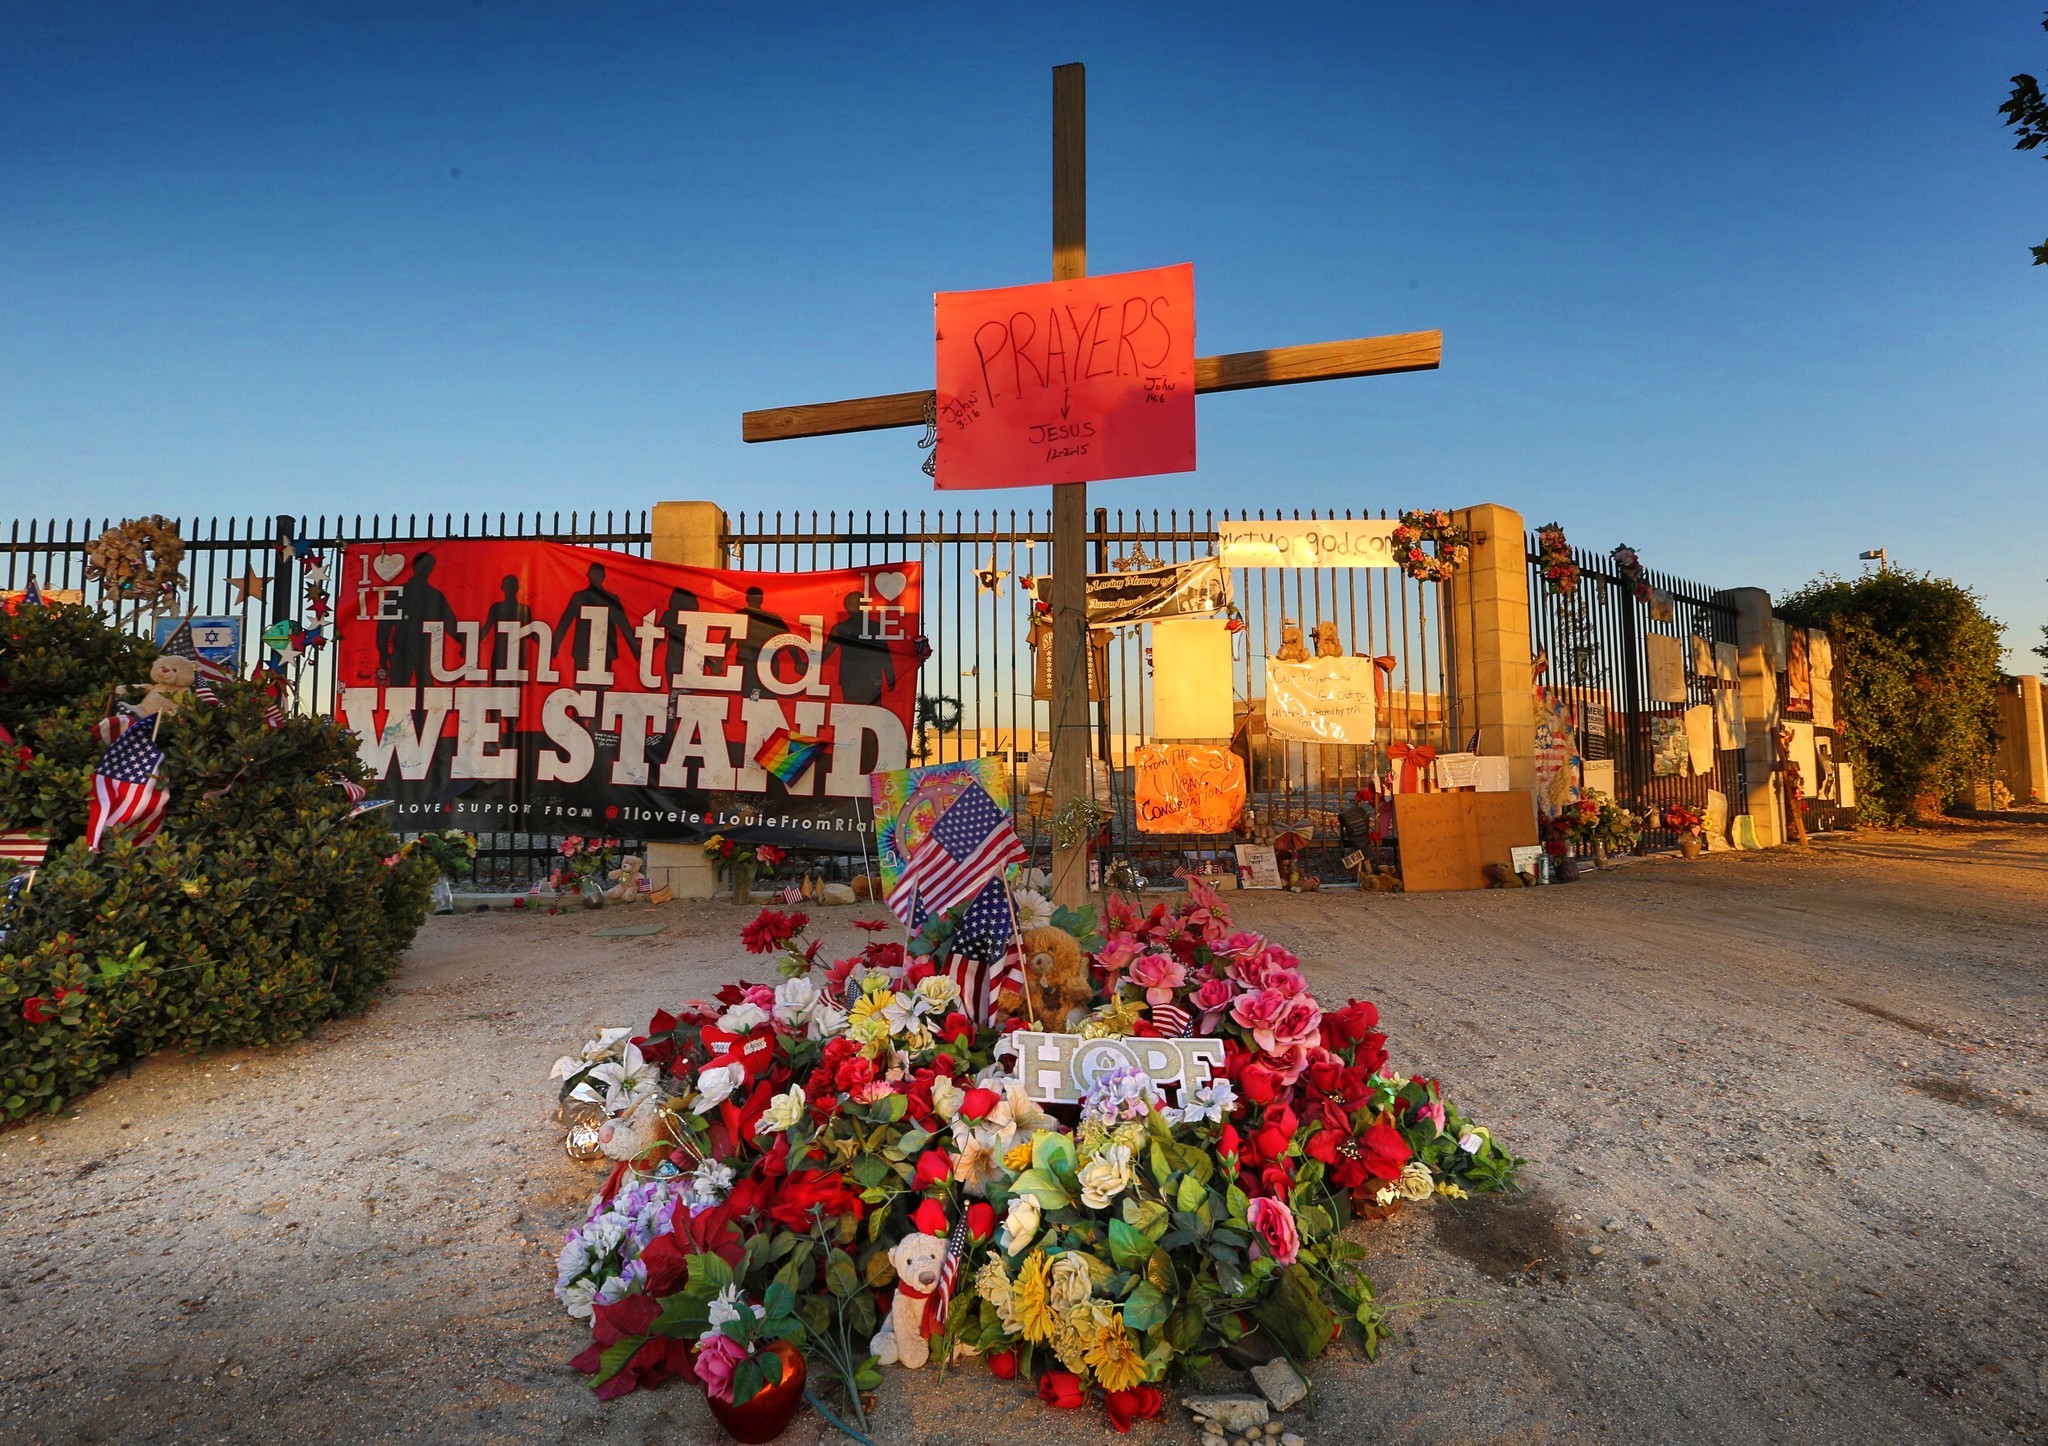 Near the Inland Regional Center in San Bernardino, Calif., flowers and signs still honor the 14 people killed in a mass shooting there in 2015.